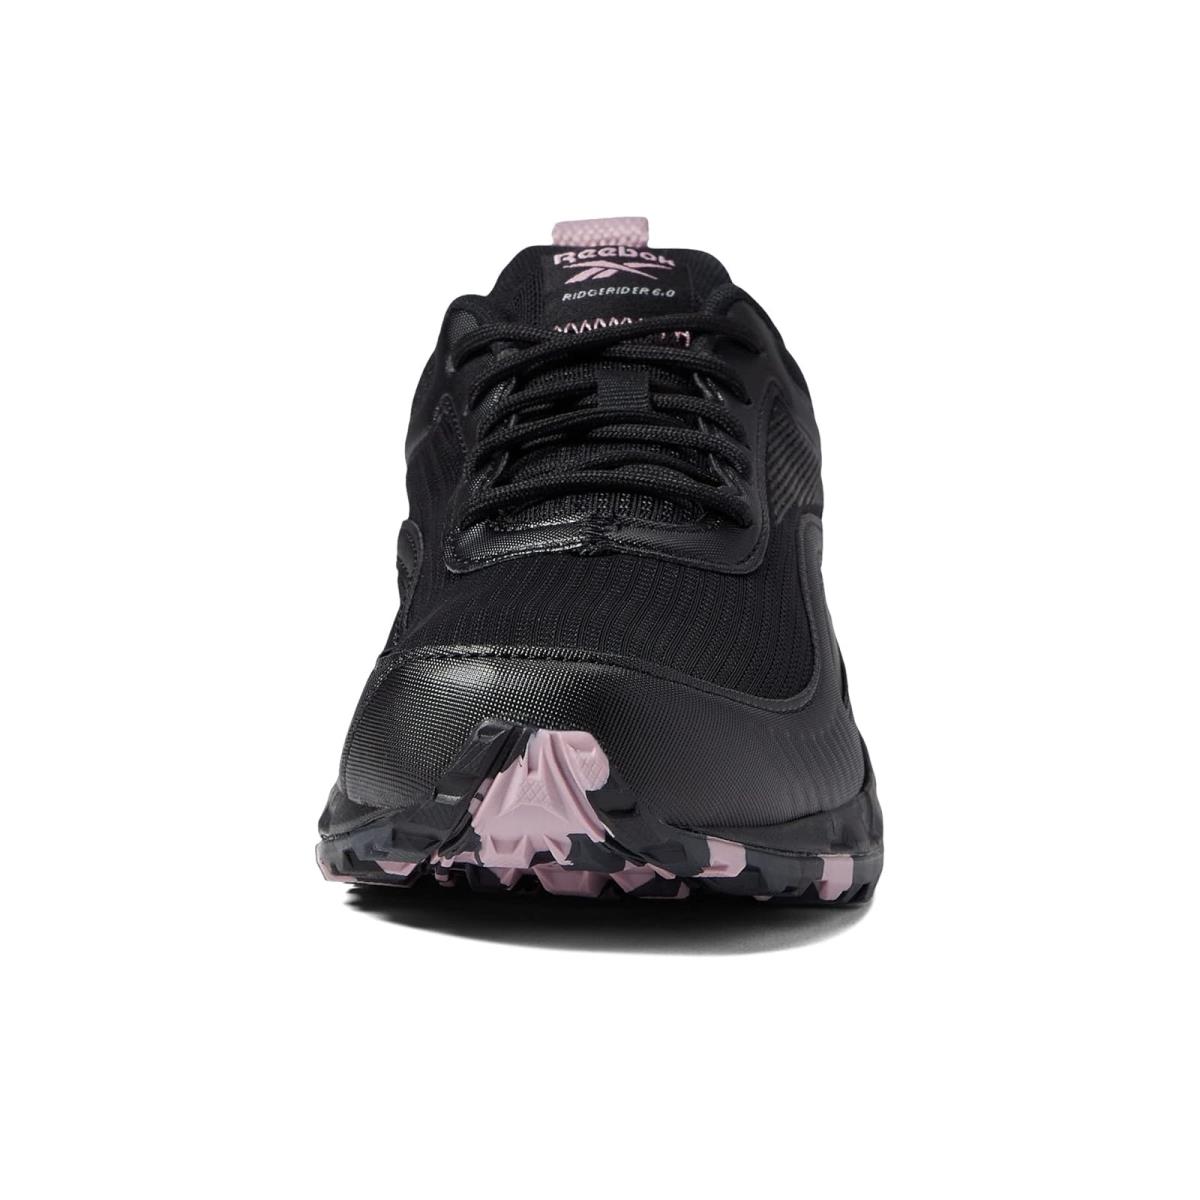 Reebok shoes  - Black/Pure Grey/Infused Lilac 1